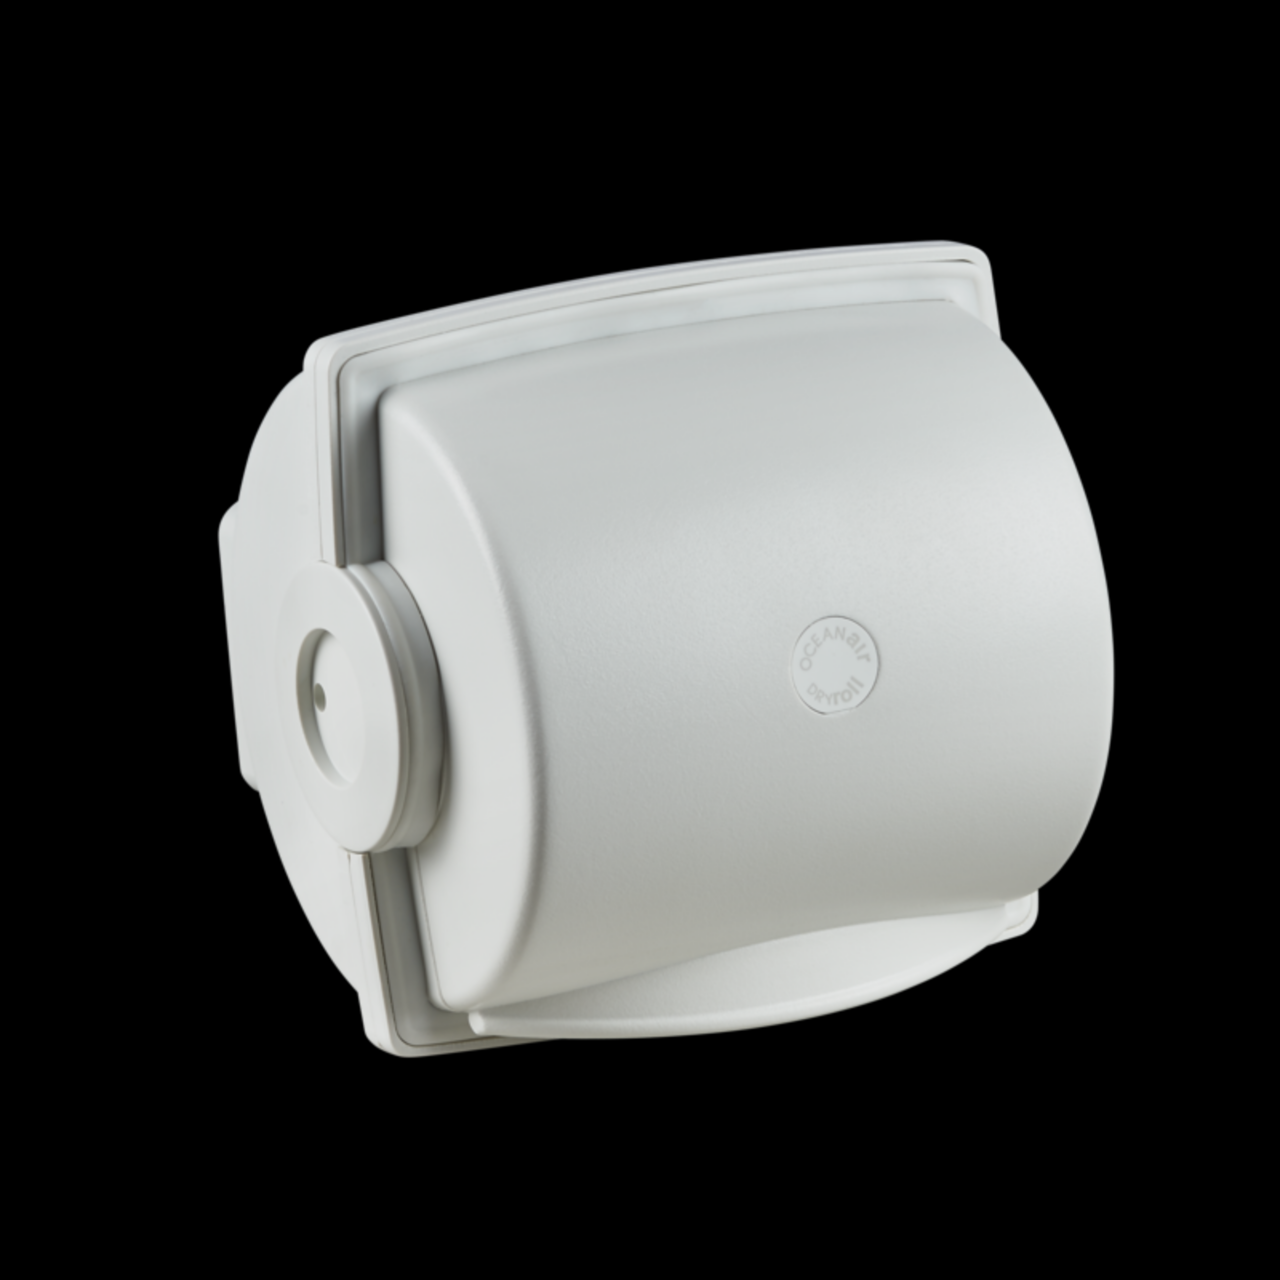 Dometic Dryroll - Water tight tissue dispenser